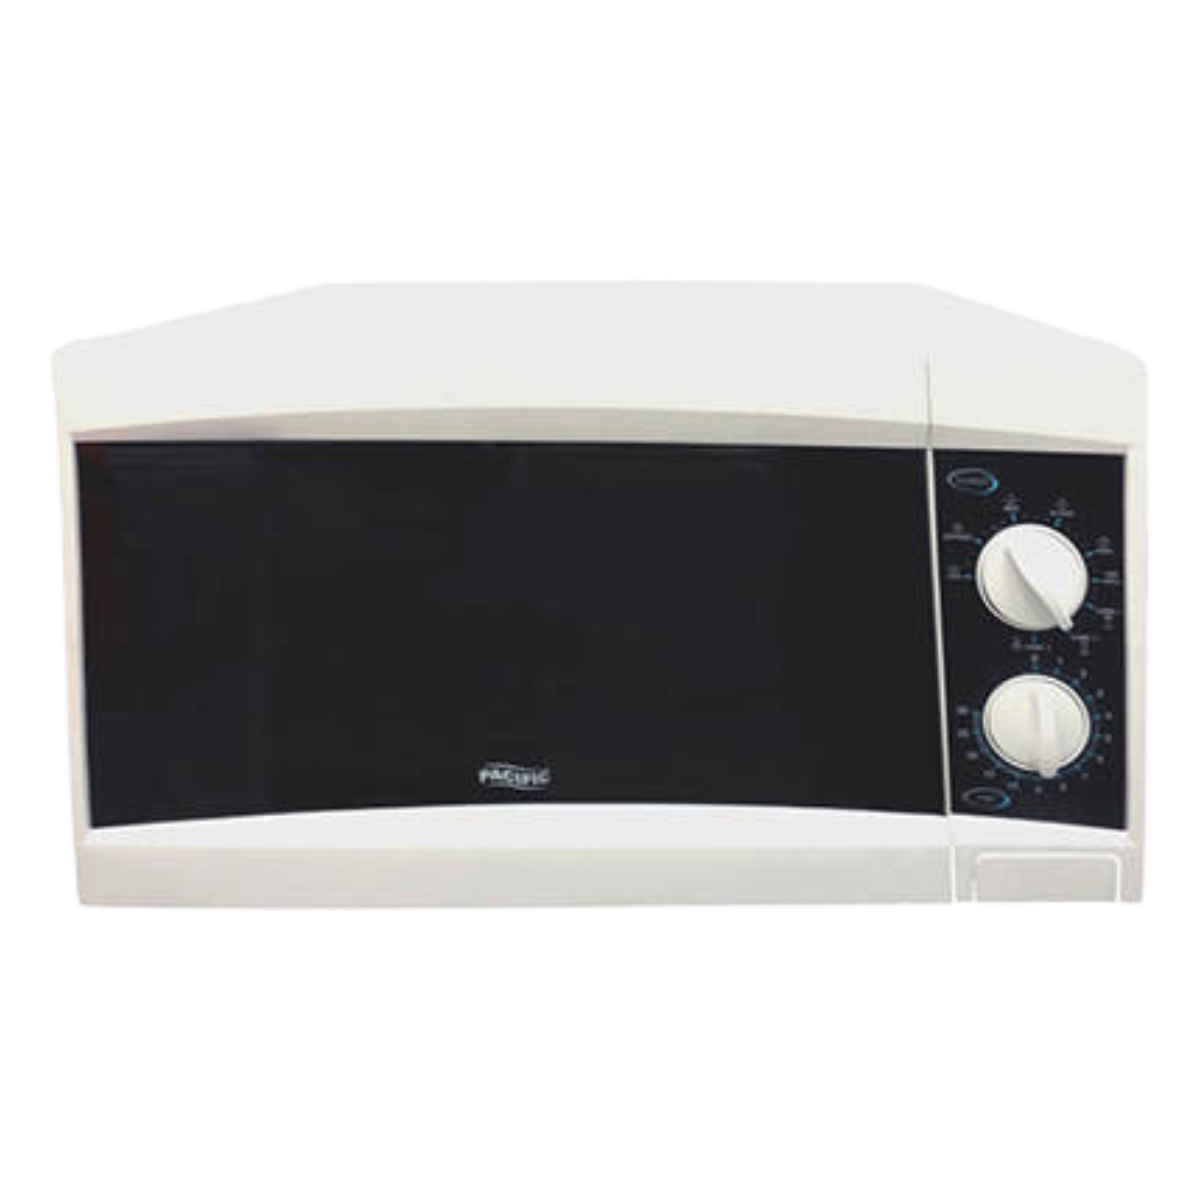 PACIFIC MICROWAVE 30L MANUAL